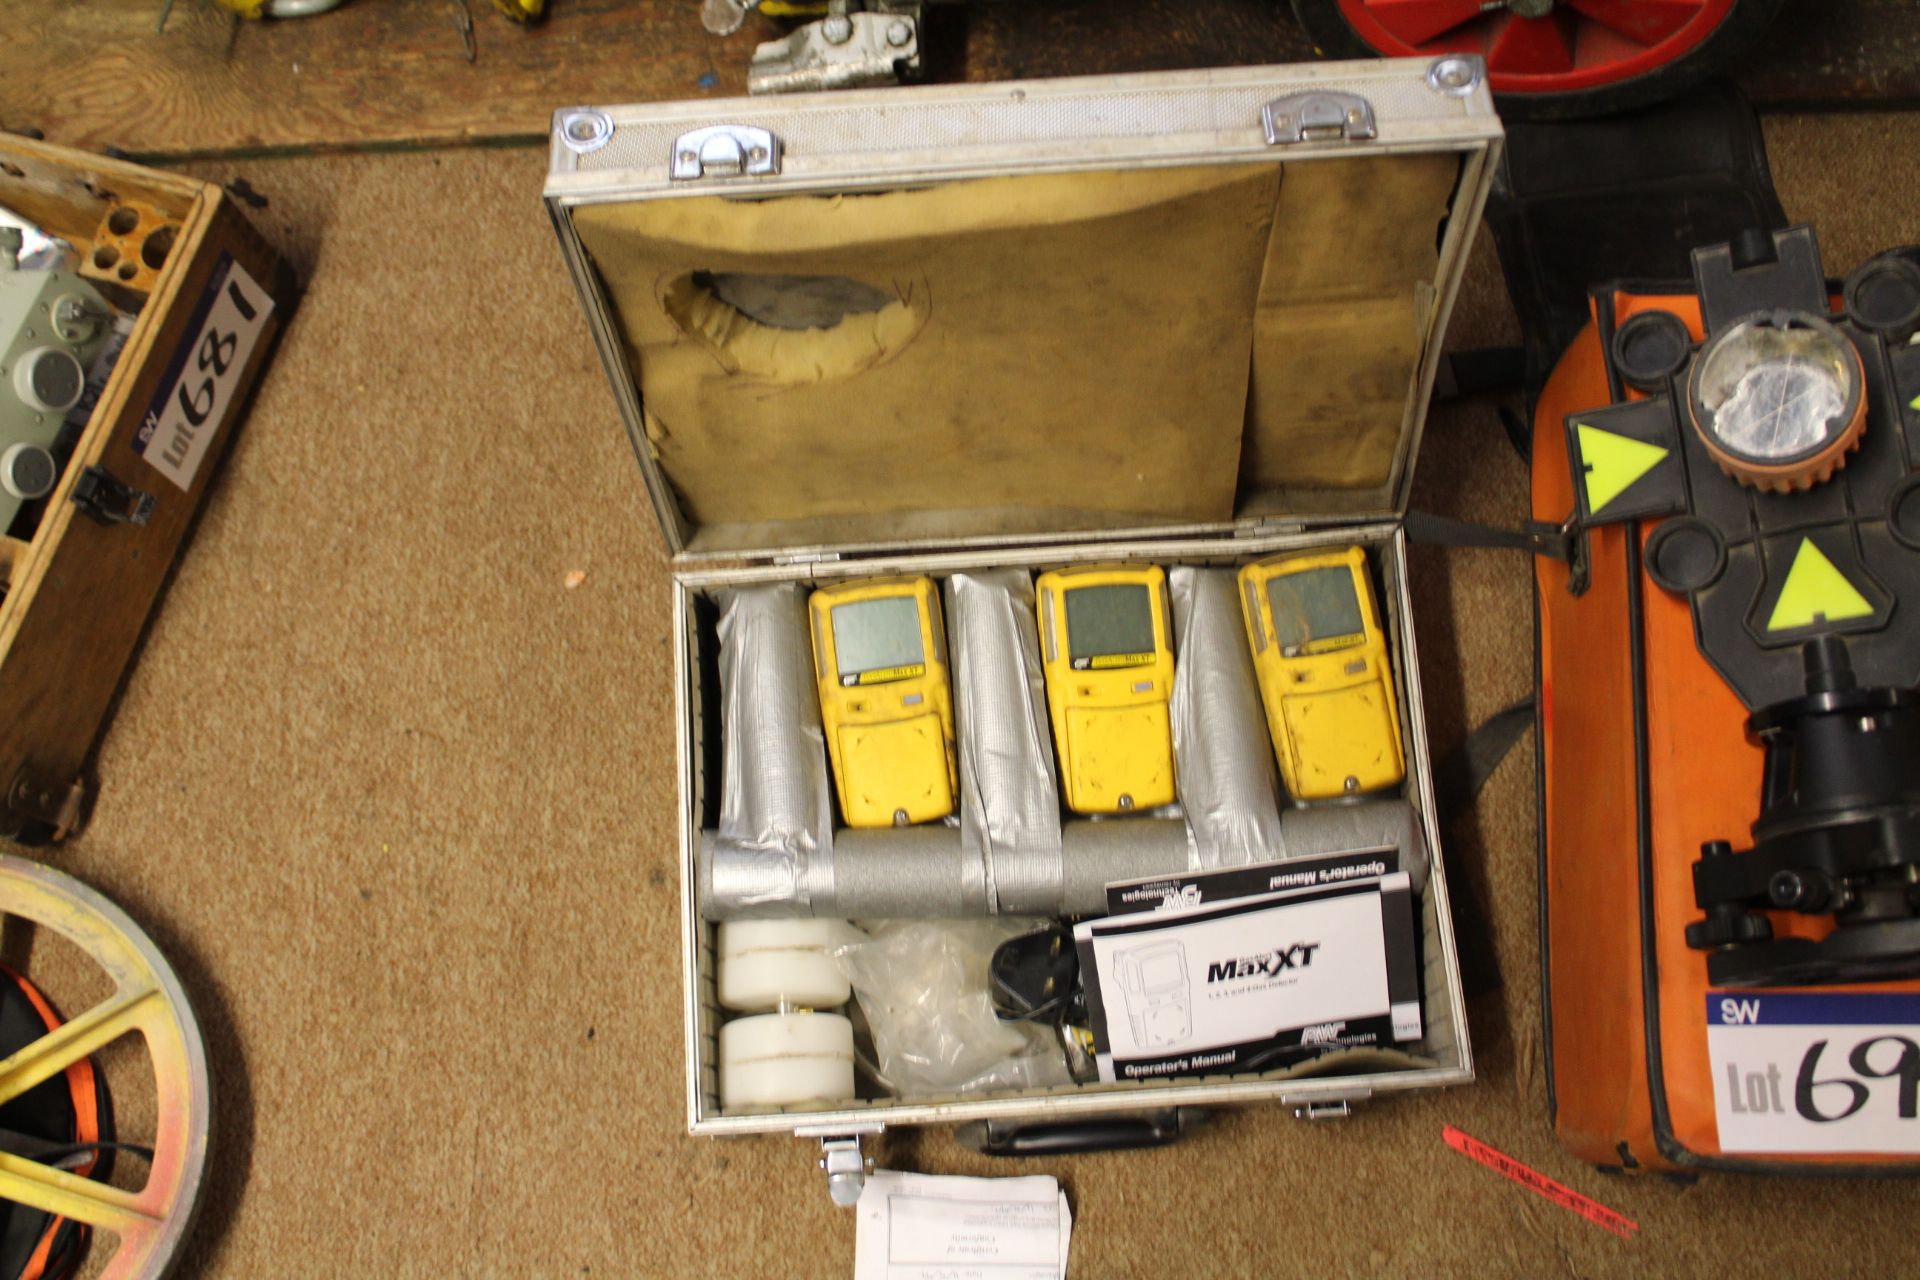 Honeywell Max XT Gas Monitor, with carry case